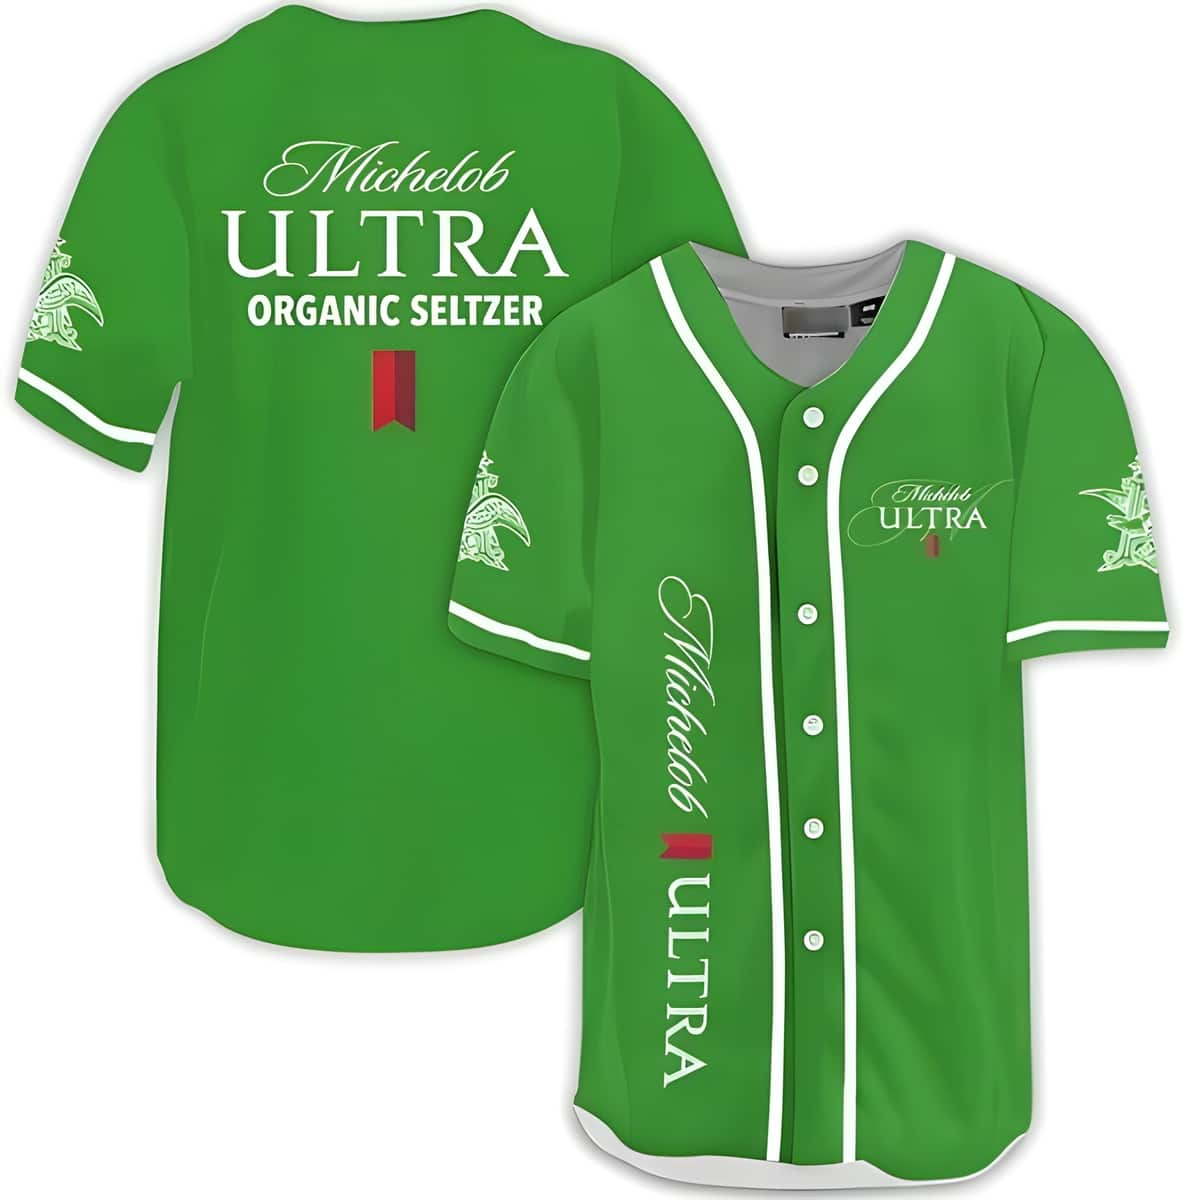 Classic Green Michelob ULTRA Baseball Jersey Organic Seltzer Gift For Brother